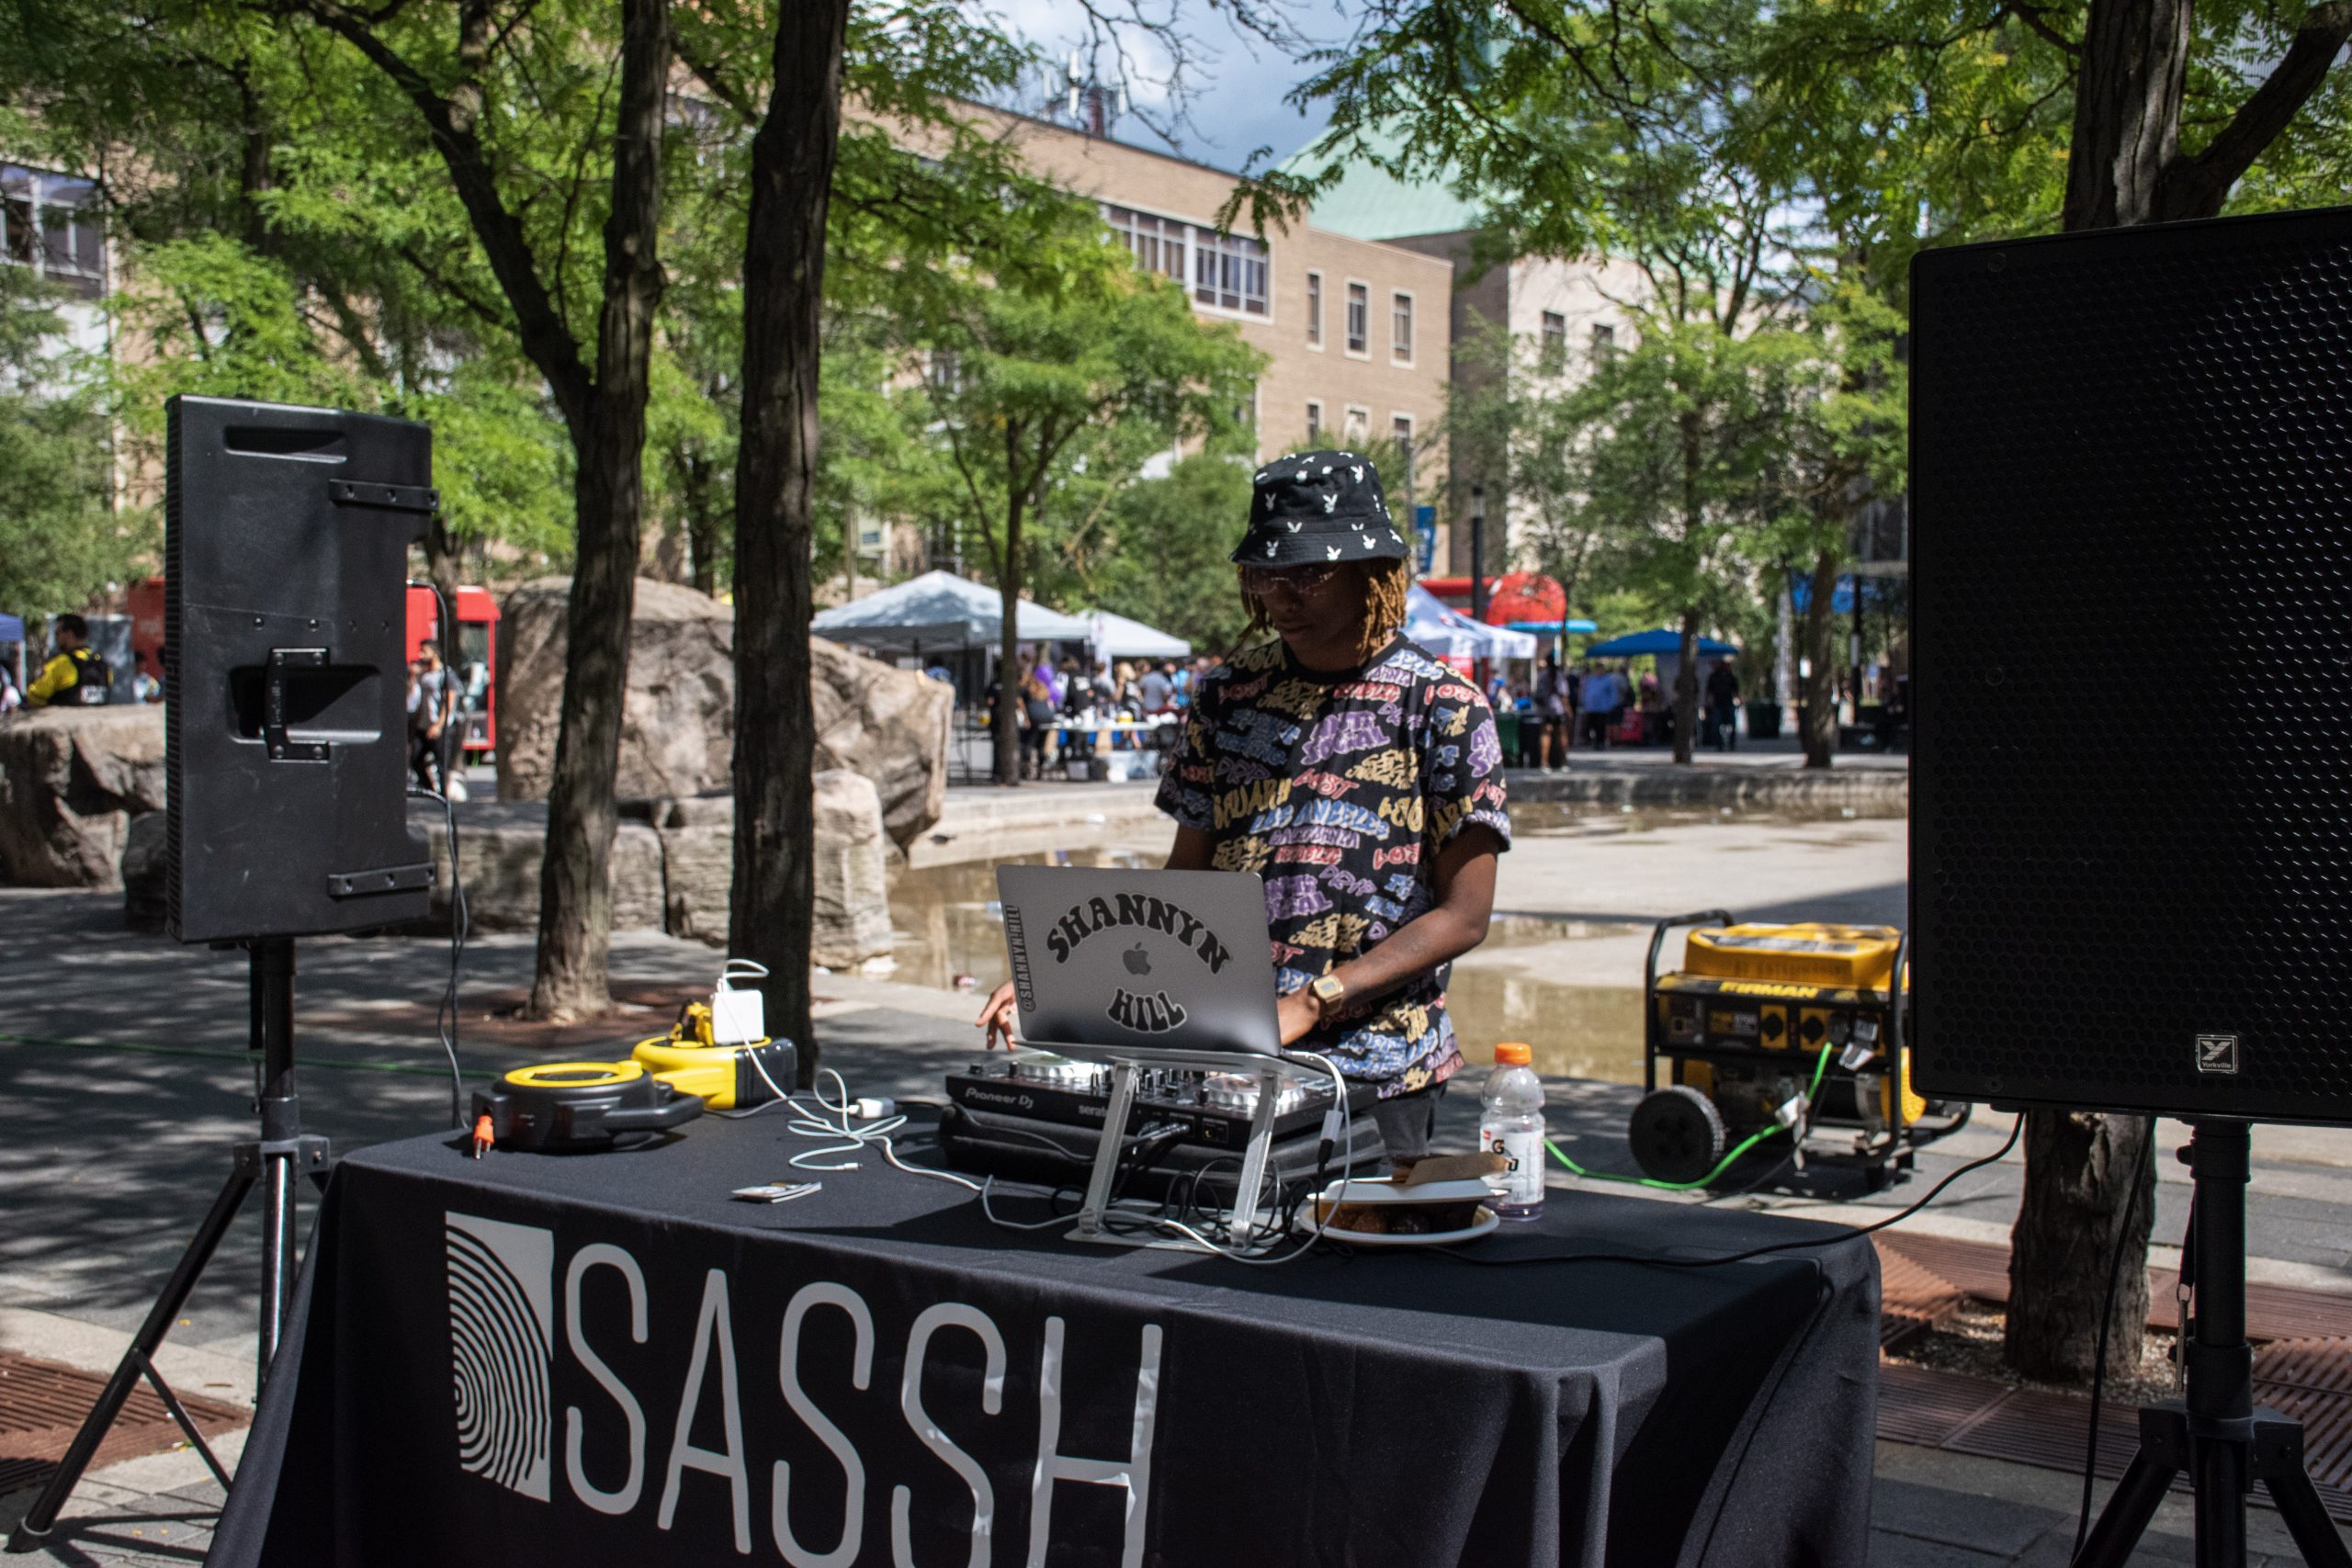 DJ in front of SASSH table